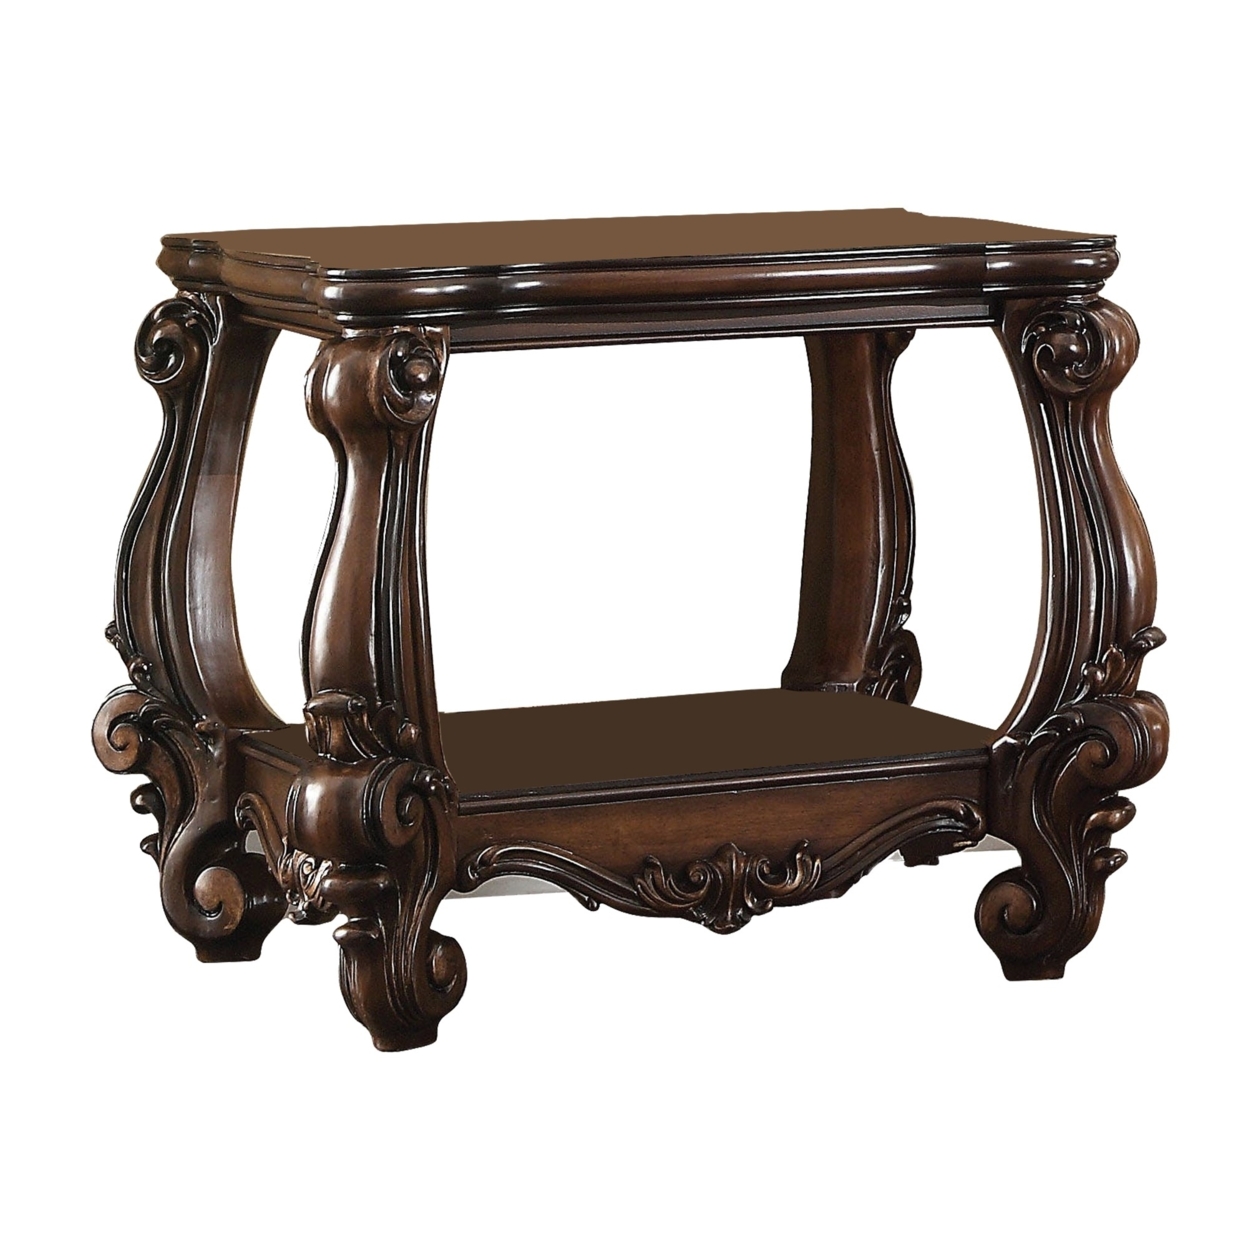 Wooden End Table With Bottom Shelf In Cherry Brown- Saltoro Sherpi